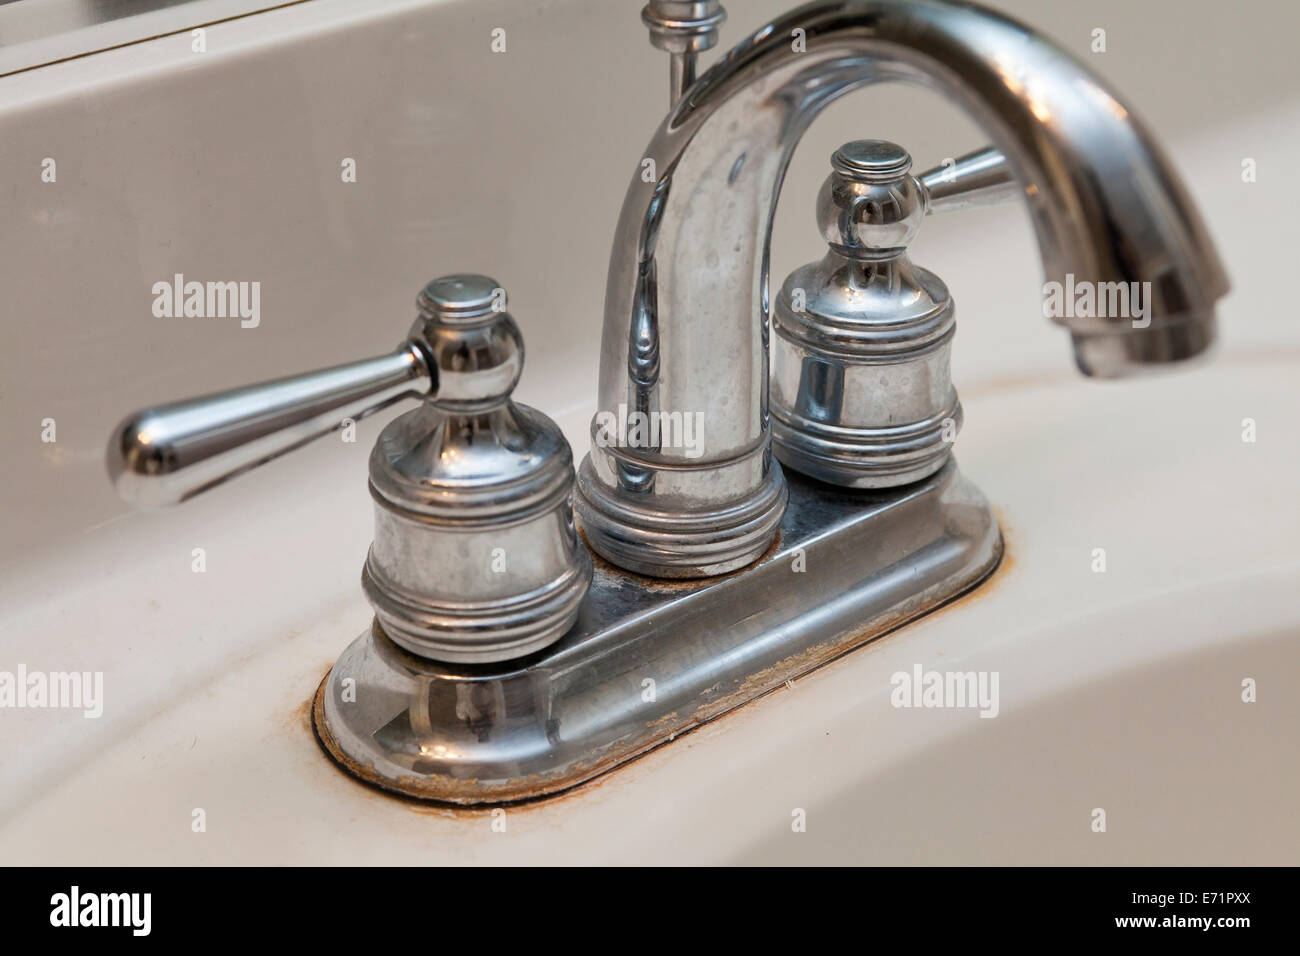 Dirty Vanity Sink Faucet Stock Photo 73184018 Alamy